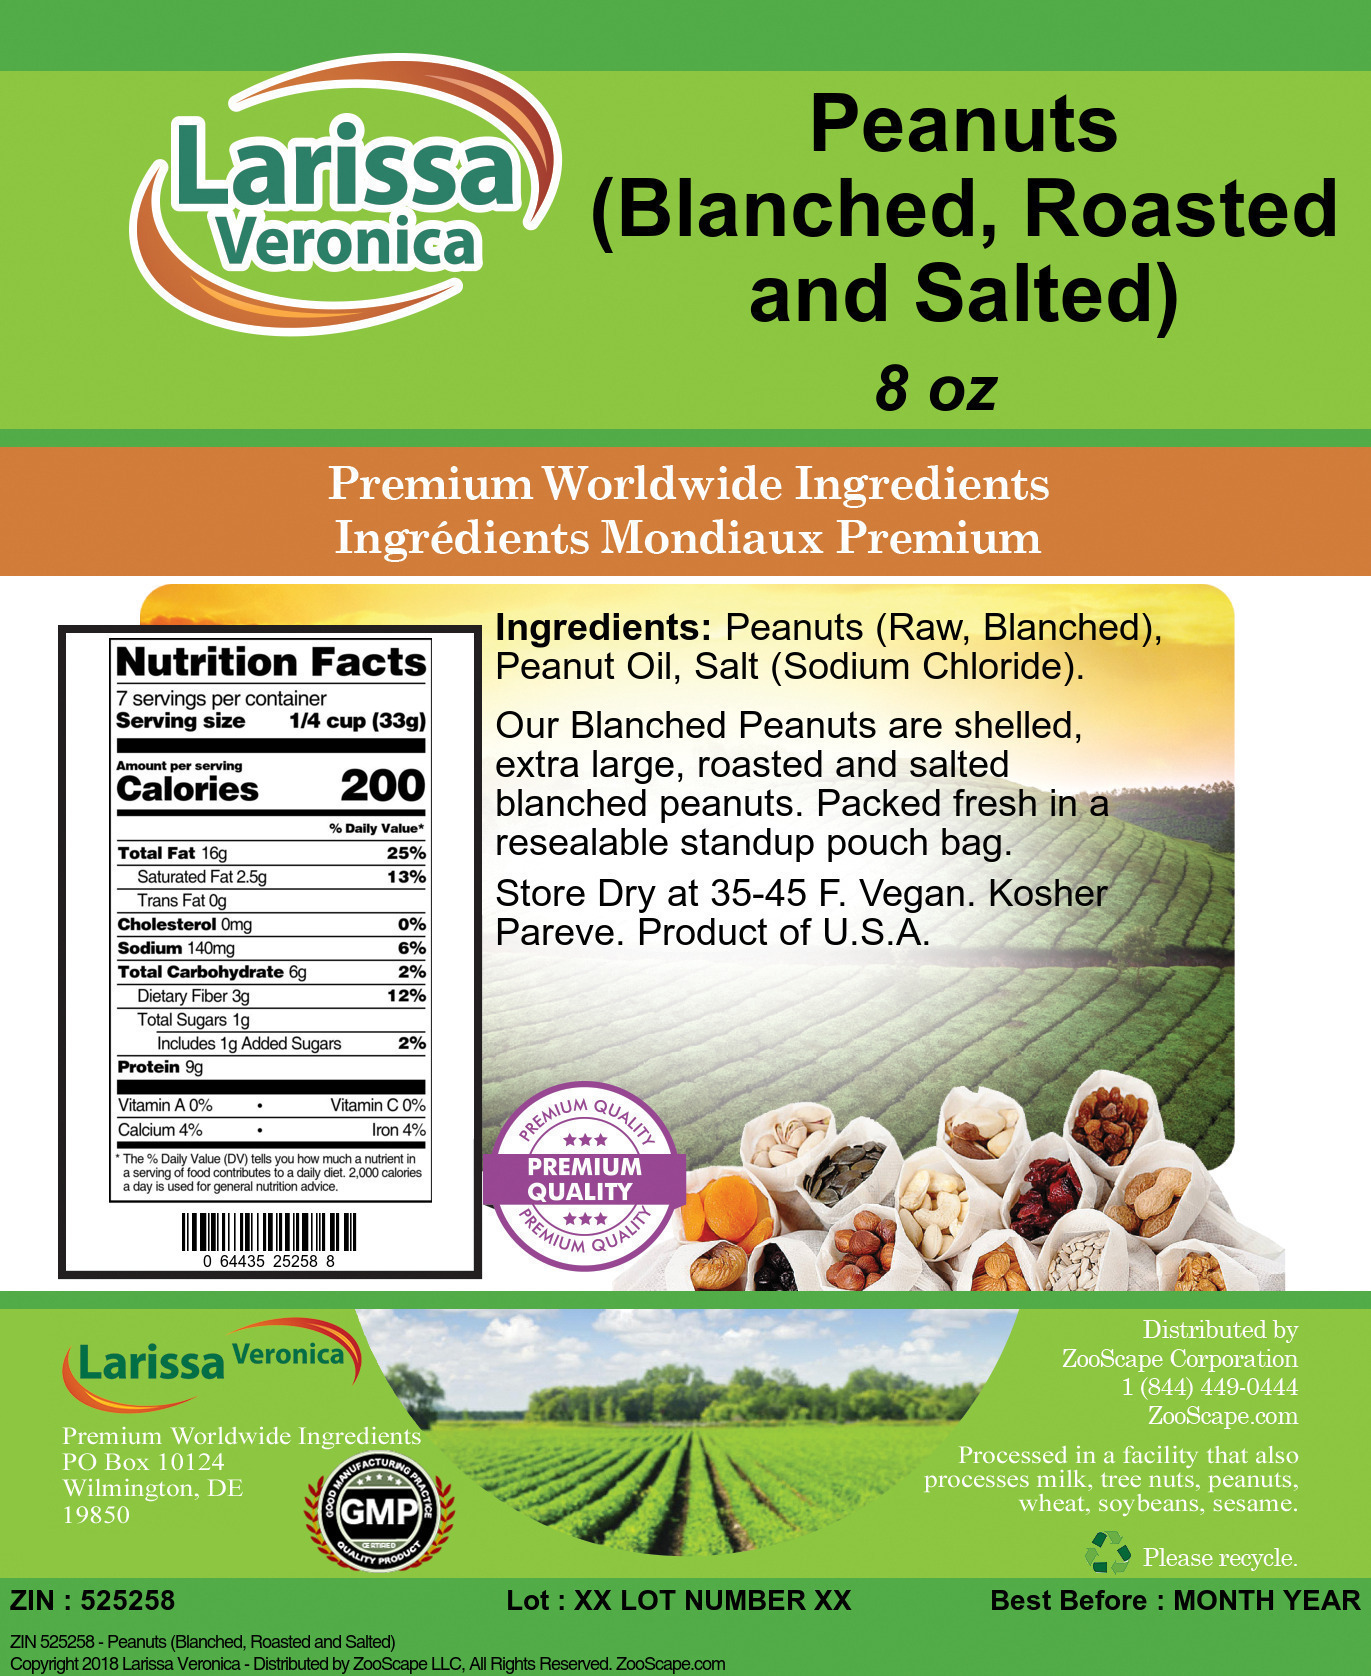 Peanuts (Blanched, Roasted and Salted) - Label